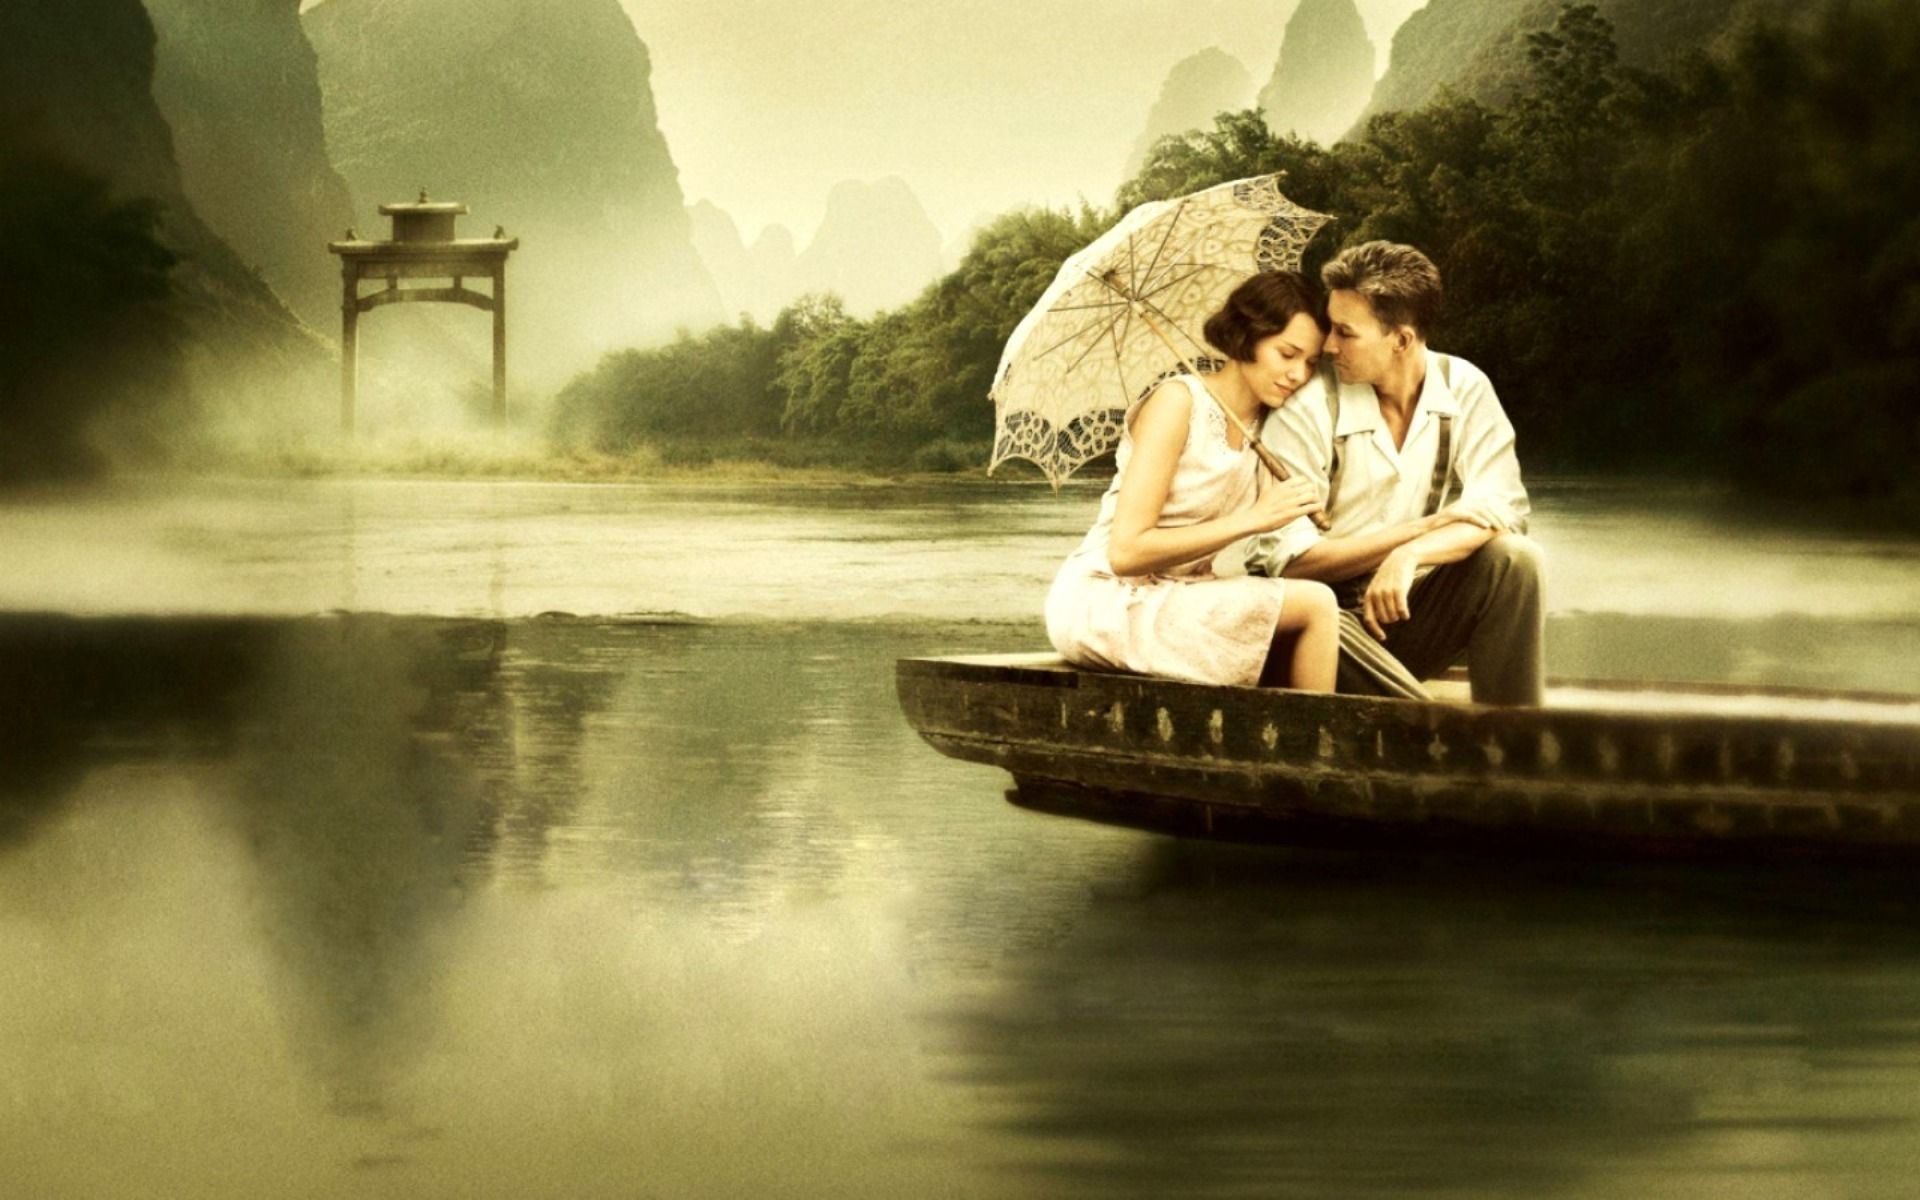 Romantic Love Couple Images Free Download Wallpaper For You ...